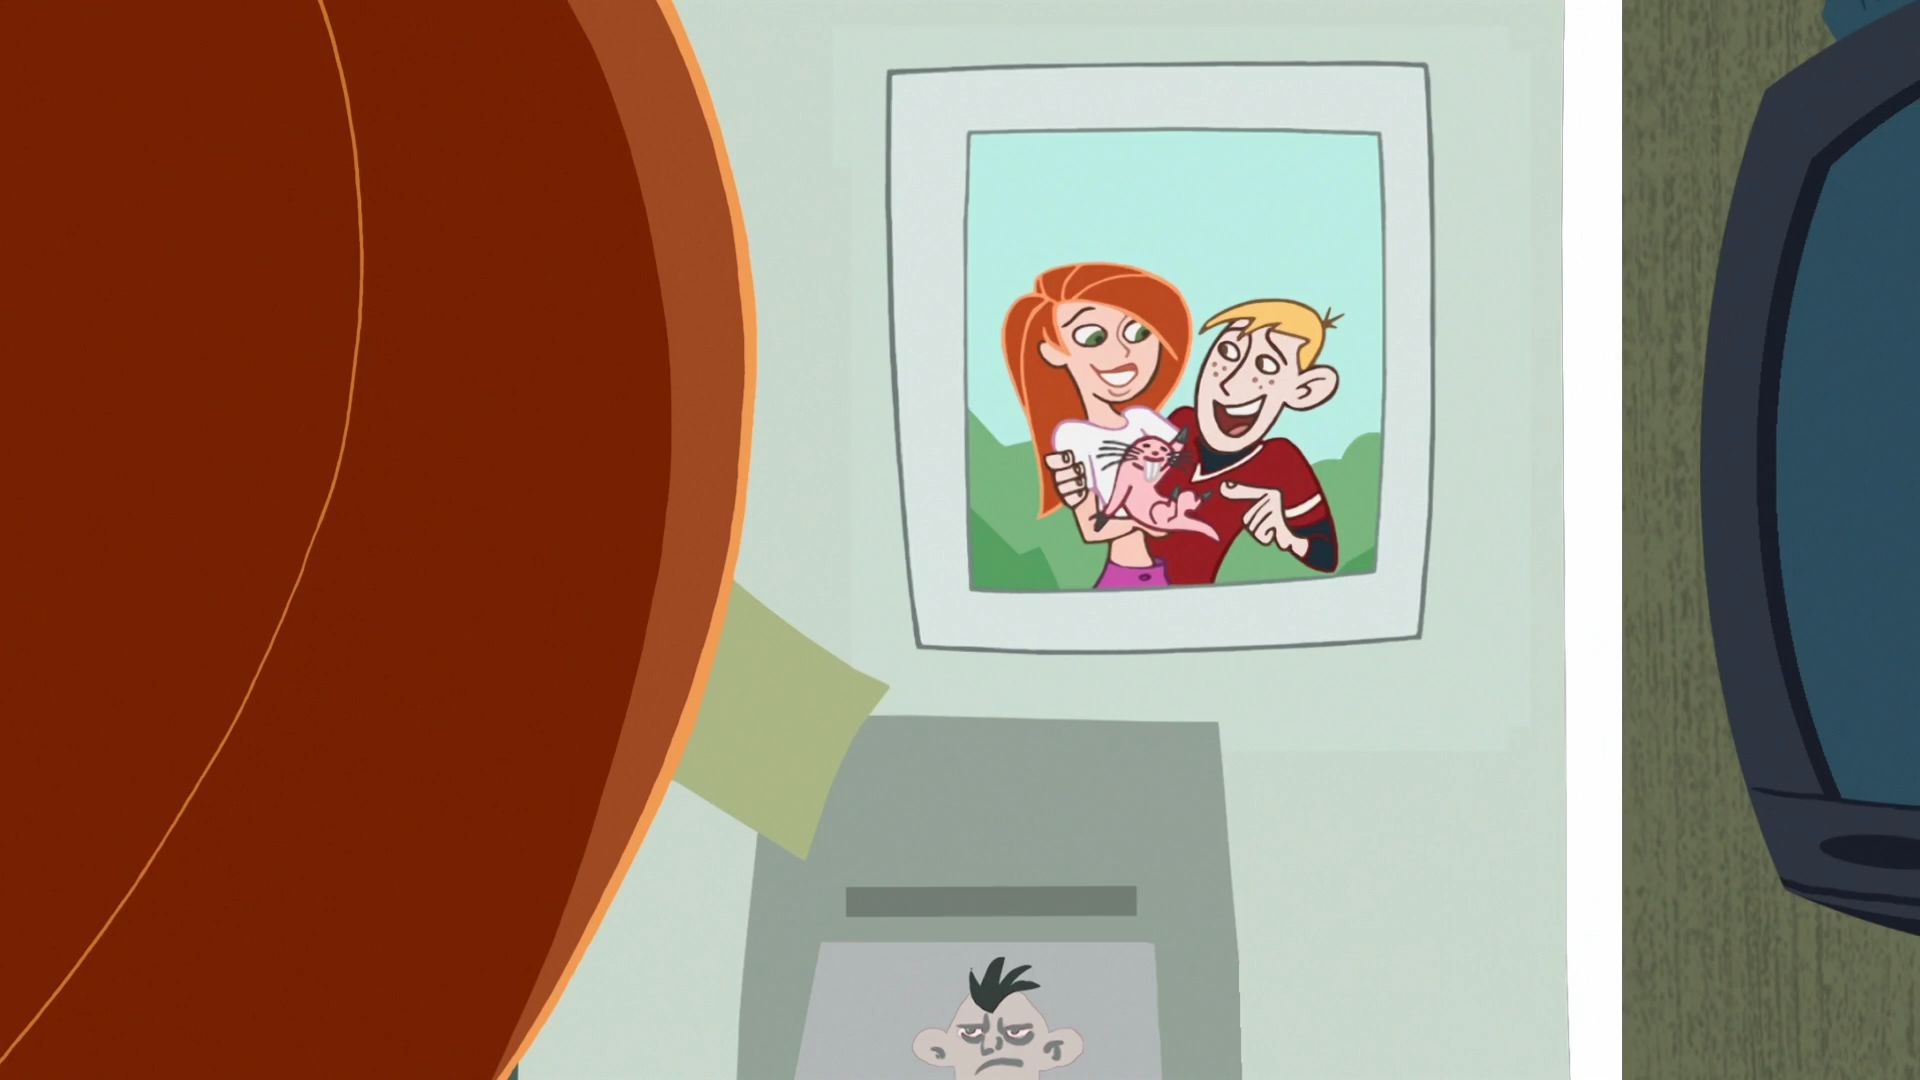 tv show, kim possible, kim possible (character), kim possible (tv show), ron stoppable